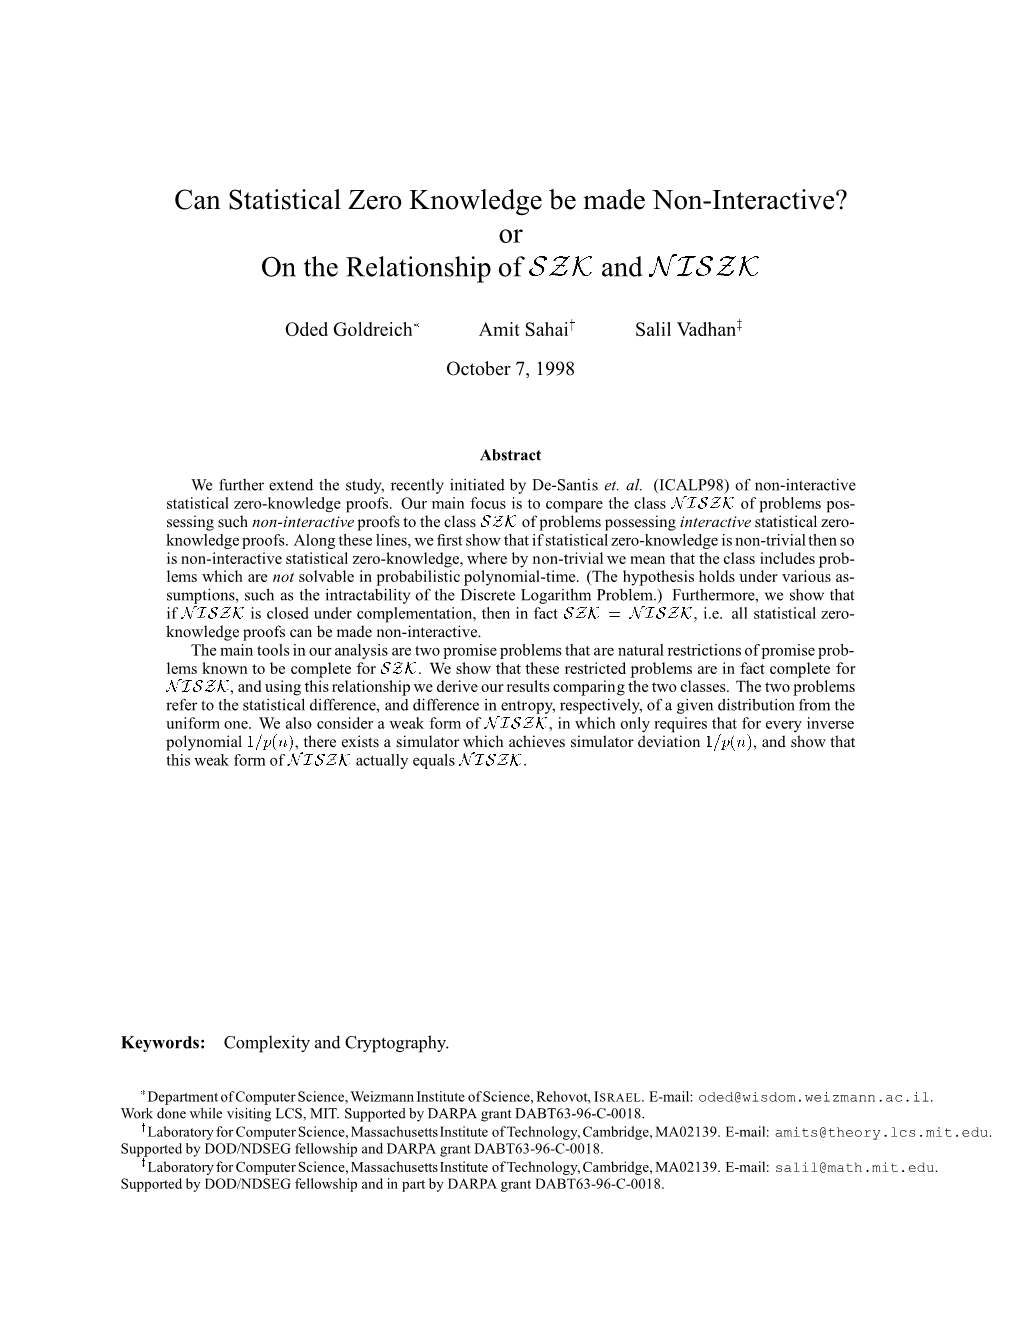 Can Statistical Zero Knowledge Be Made Non-Interactive?